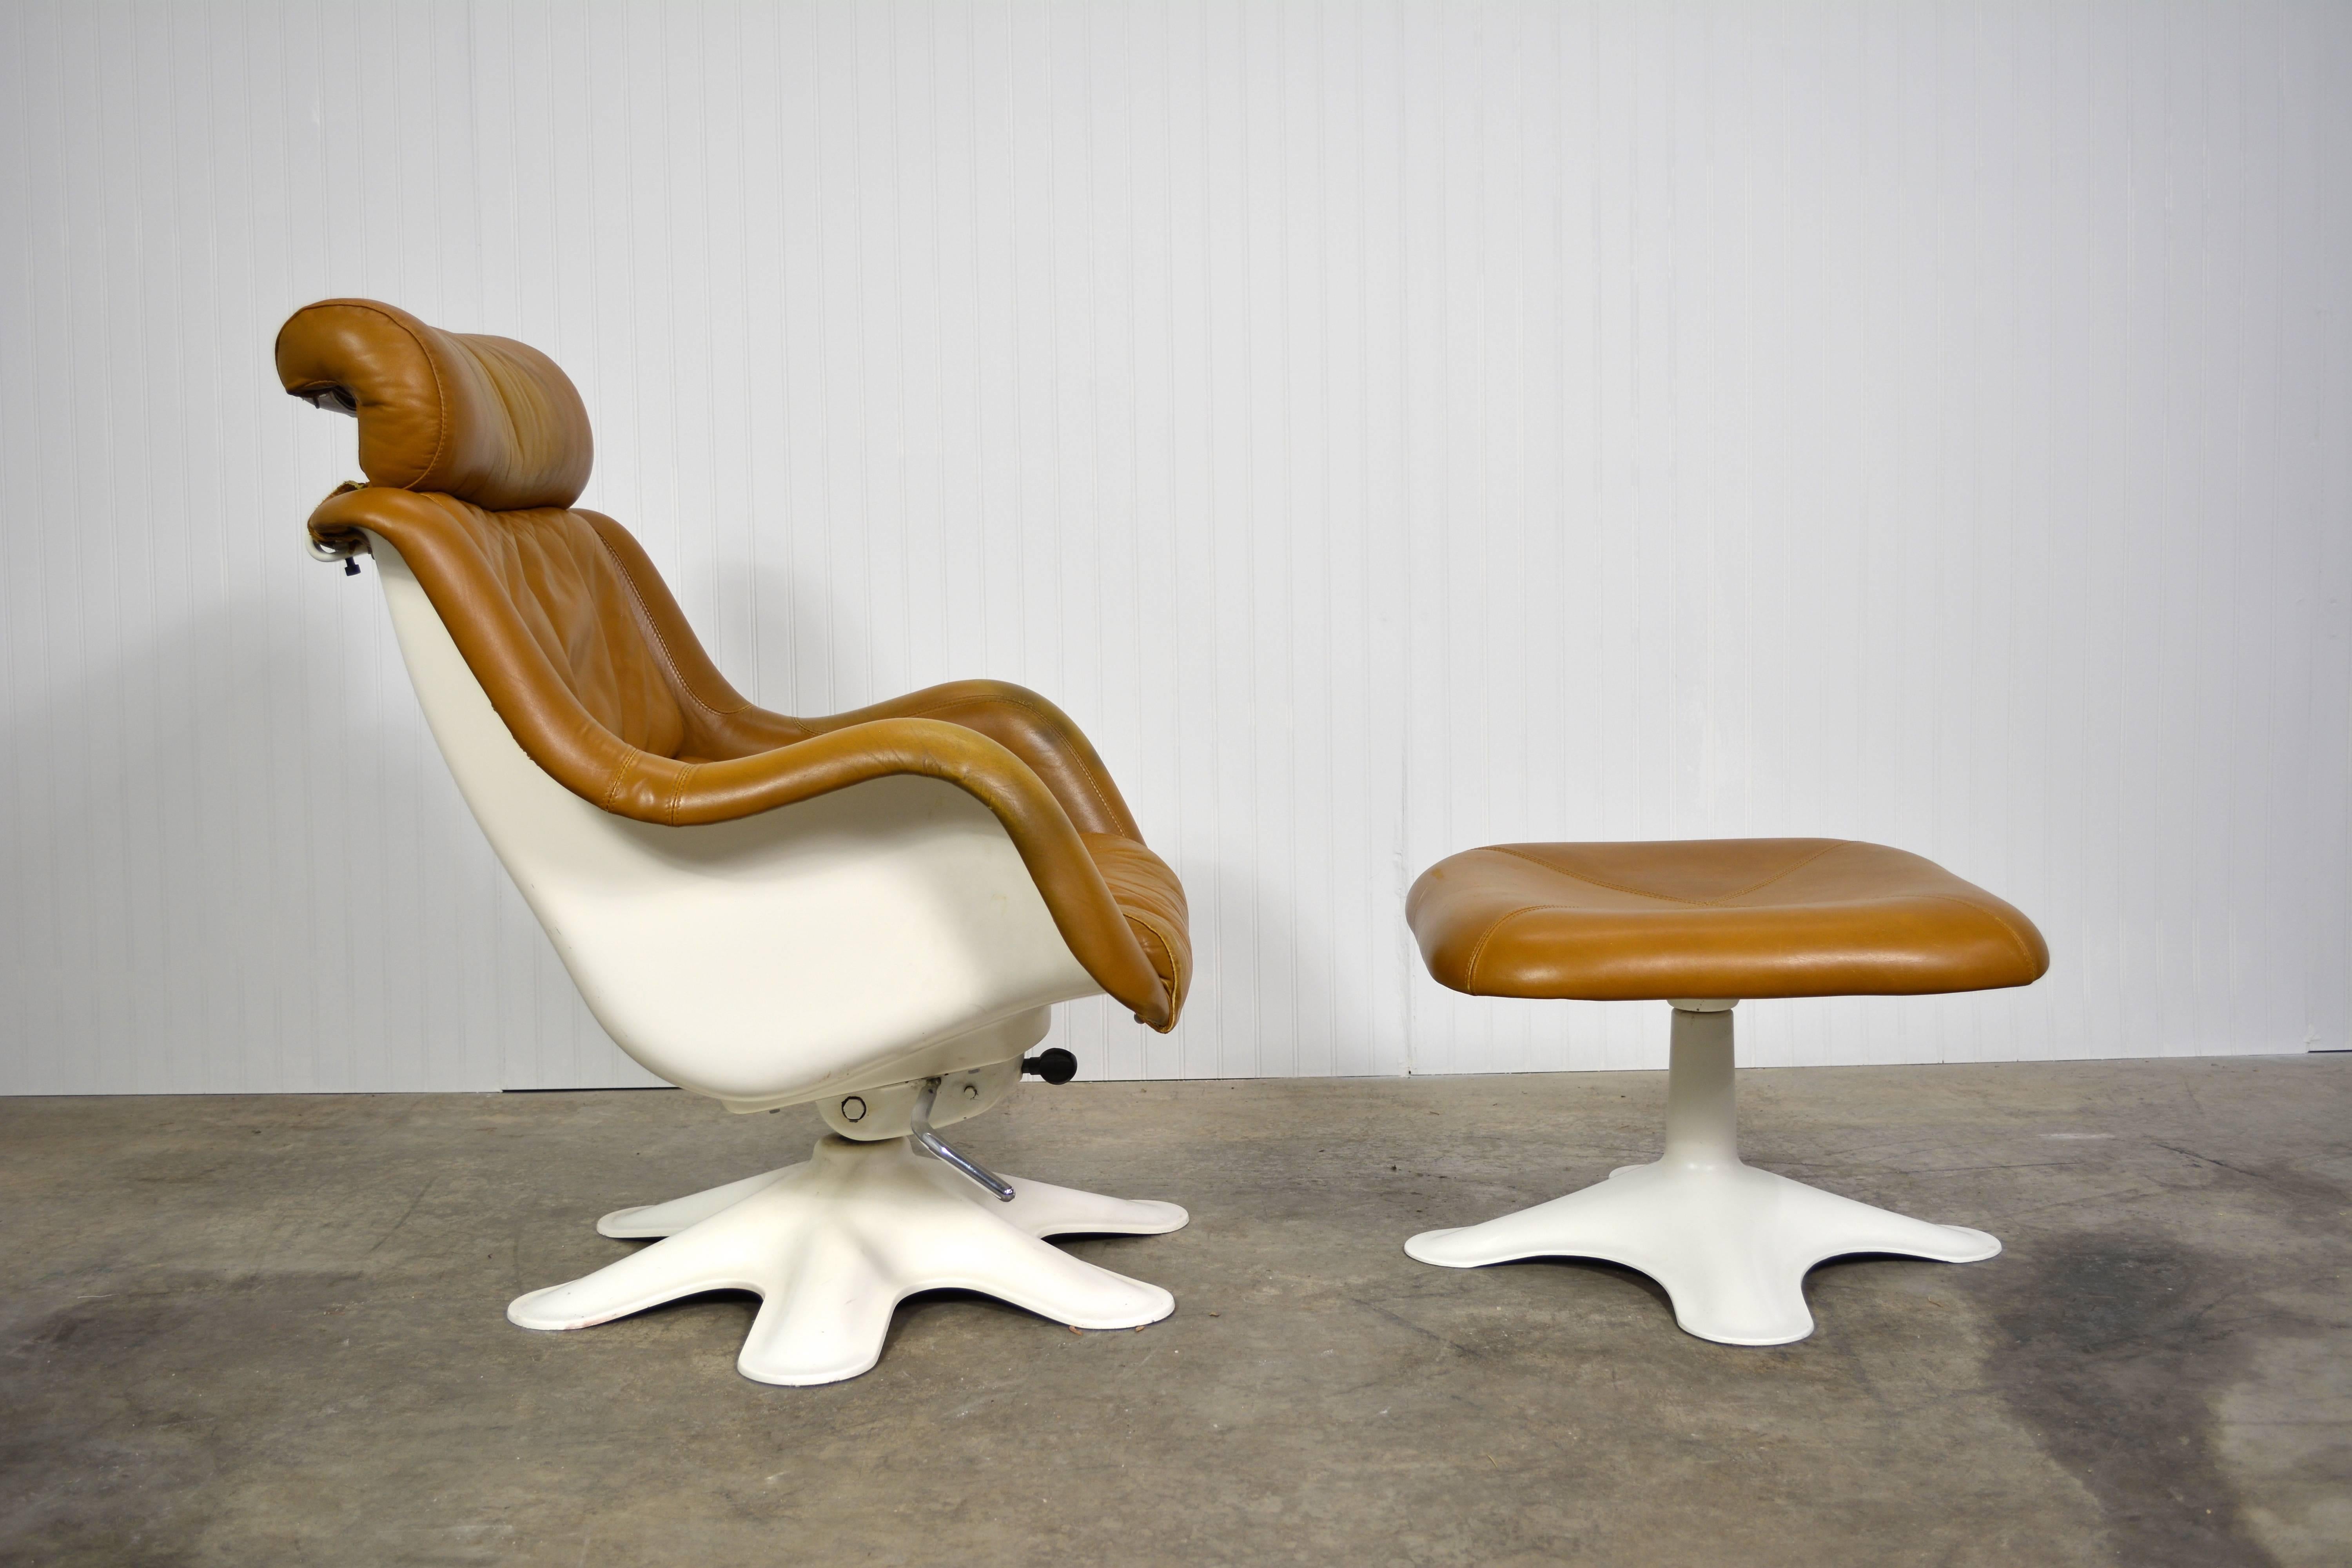 Yrjö Kukkapuro "Kaeuselli" lounge chair and ottoman in caramel leather for Hami, circa 1964. Adjustable recline mechanism. All materials are original. There are a few scuff marks on the lower left side (if looking from behind). They are